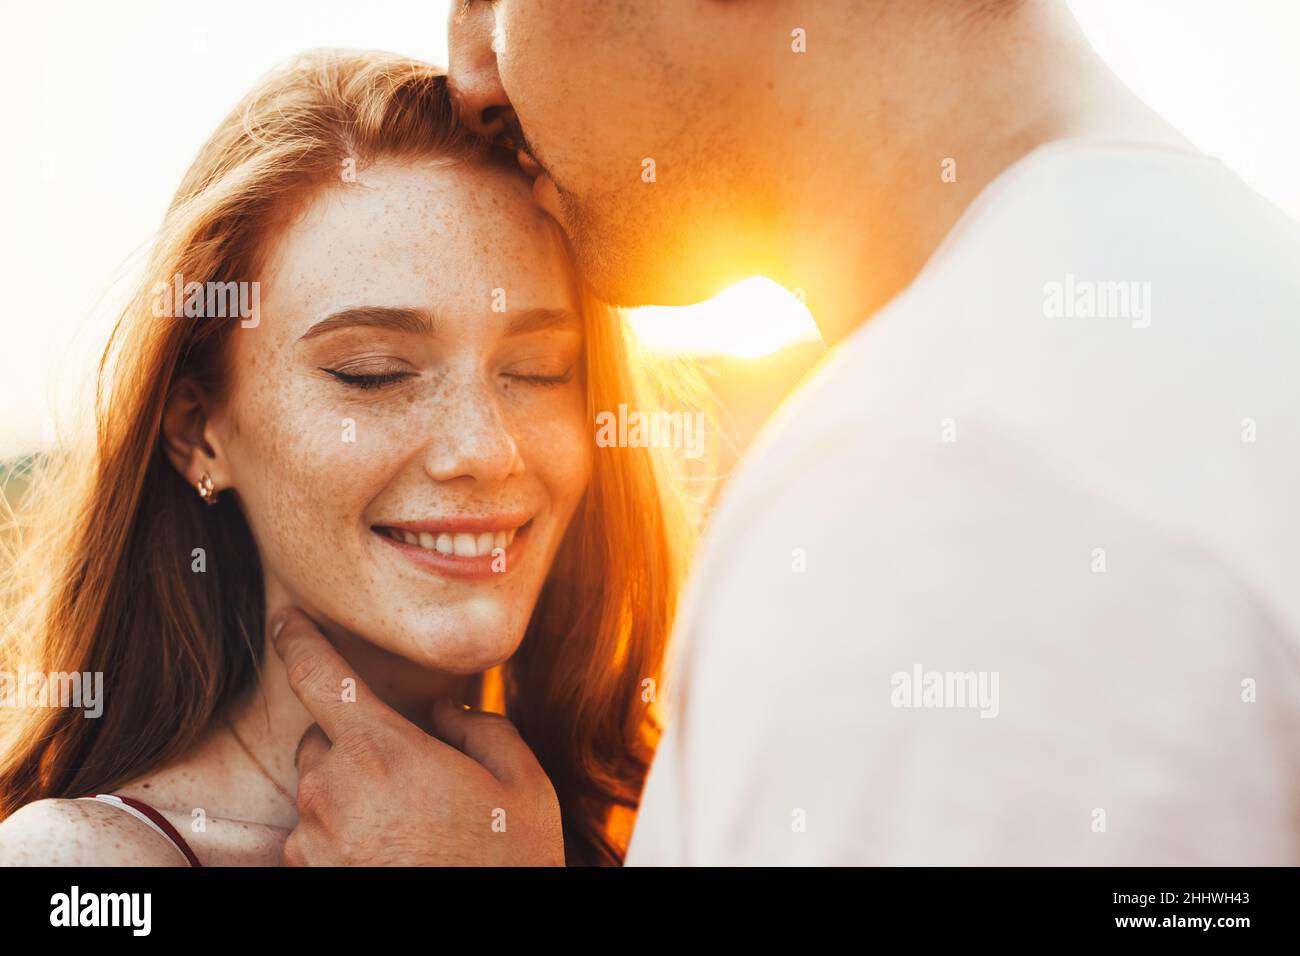 Freckled woman smiling as she is kissed on the forehead by her boyfriend's lips. Beautiful couple embracing on a road travel, great design for any Stock Photo